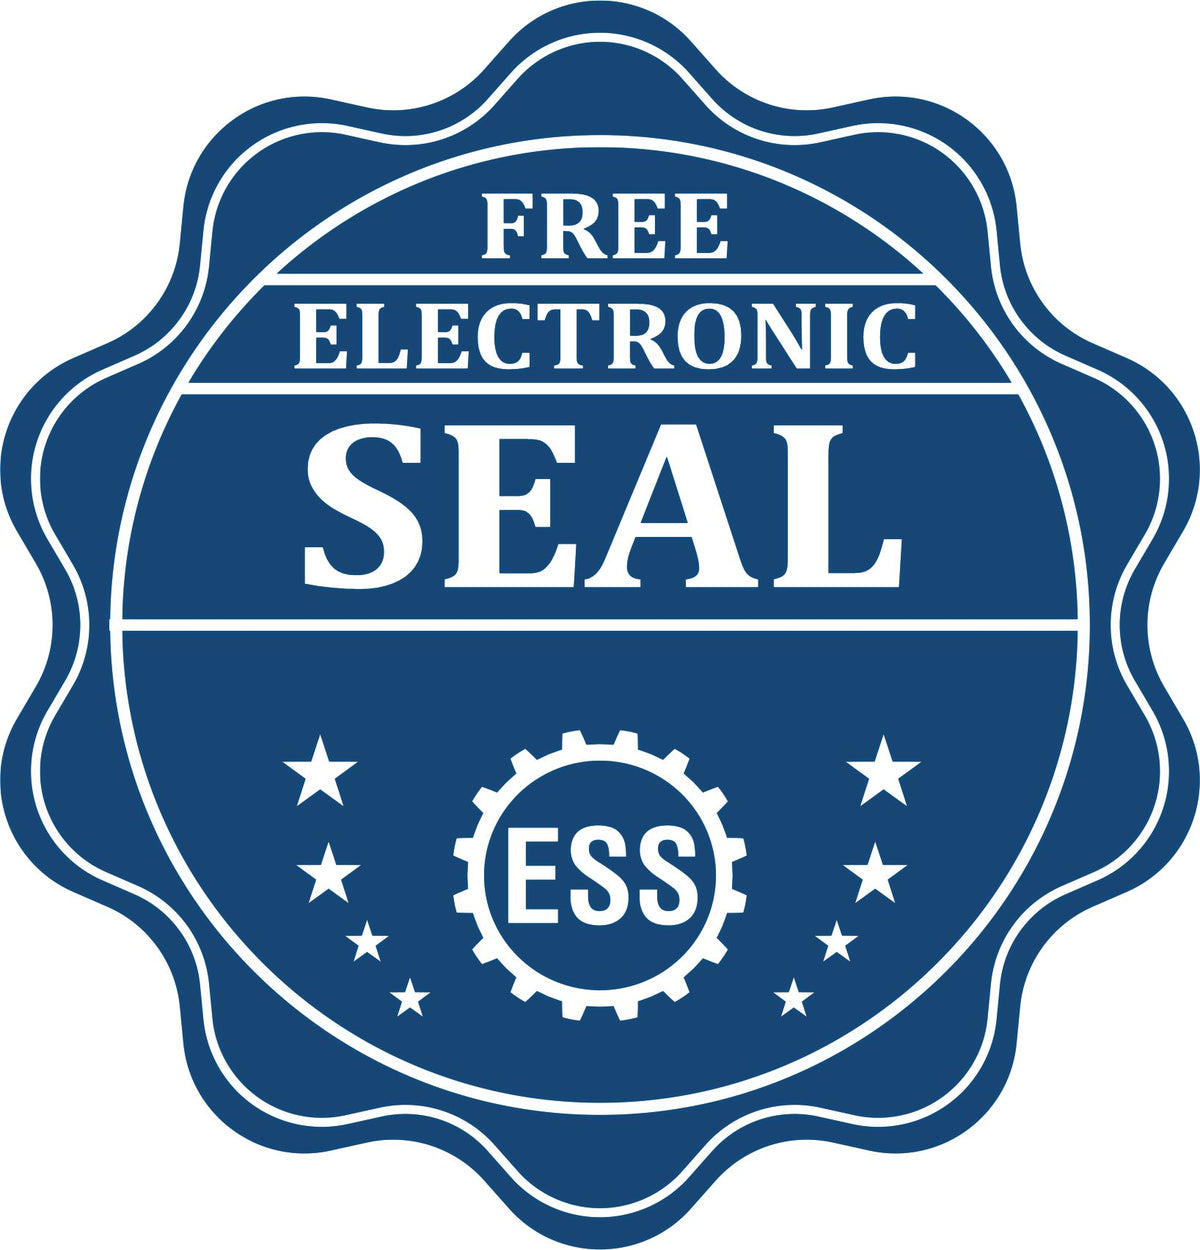 A badge showing a free electronic seal for the State of Virginia Soft Land Surveyor Embossing Seal with stars and the ESS gear on the emblem.